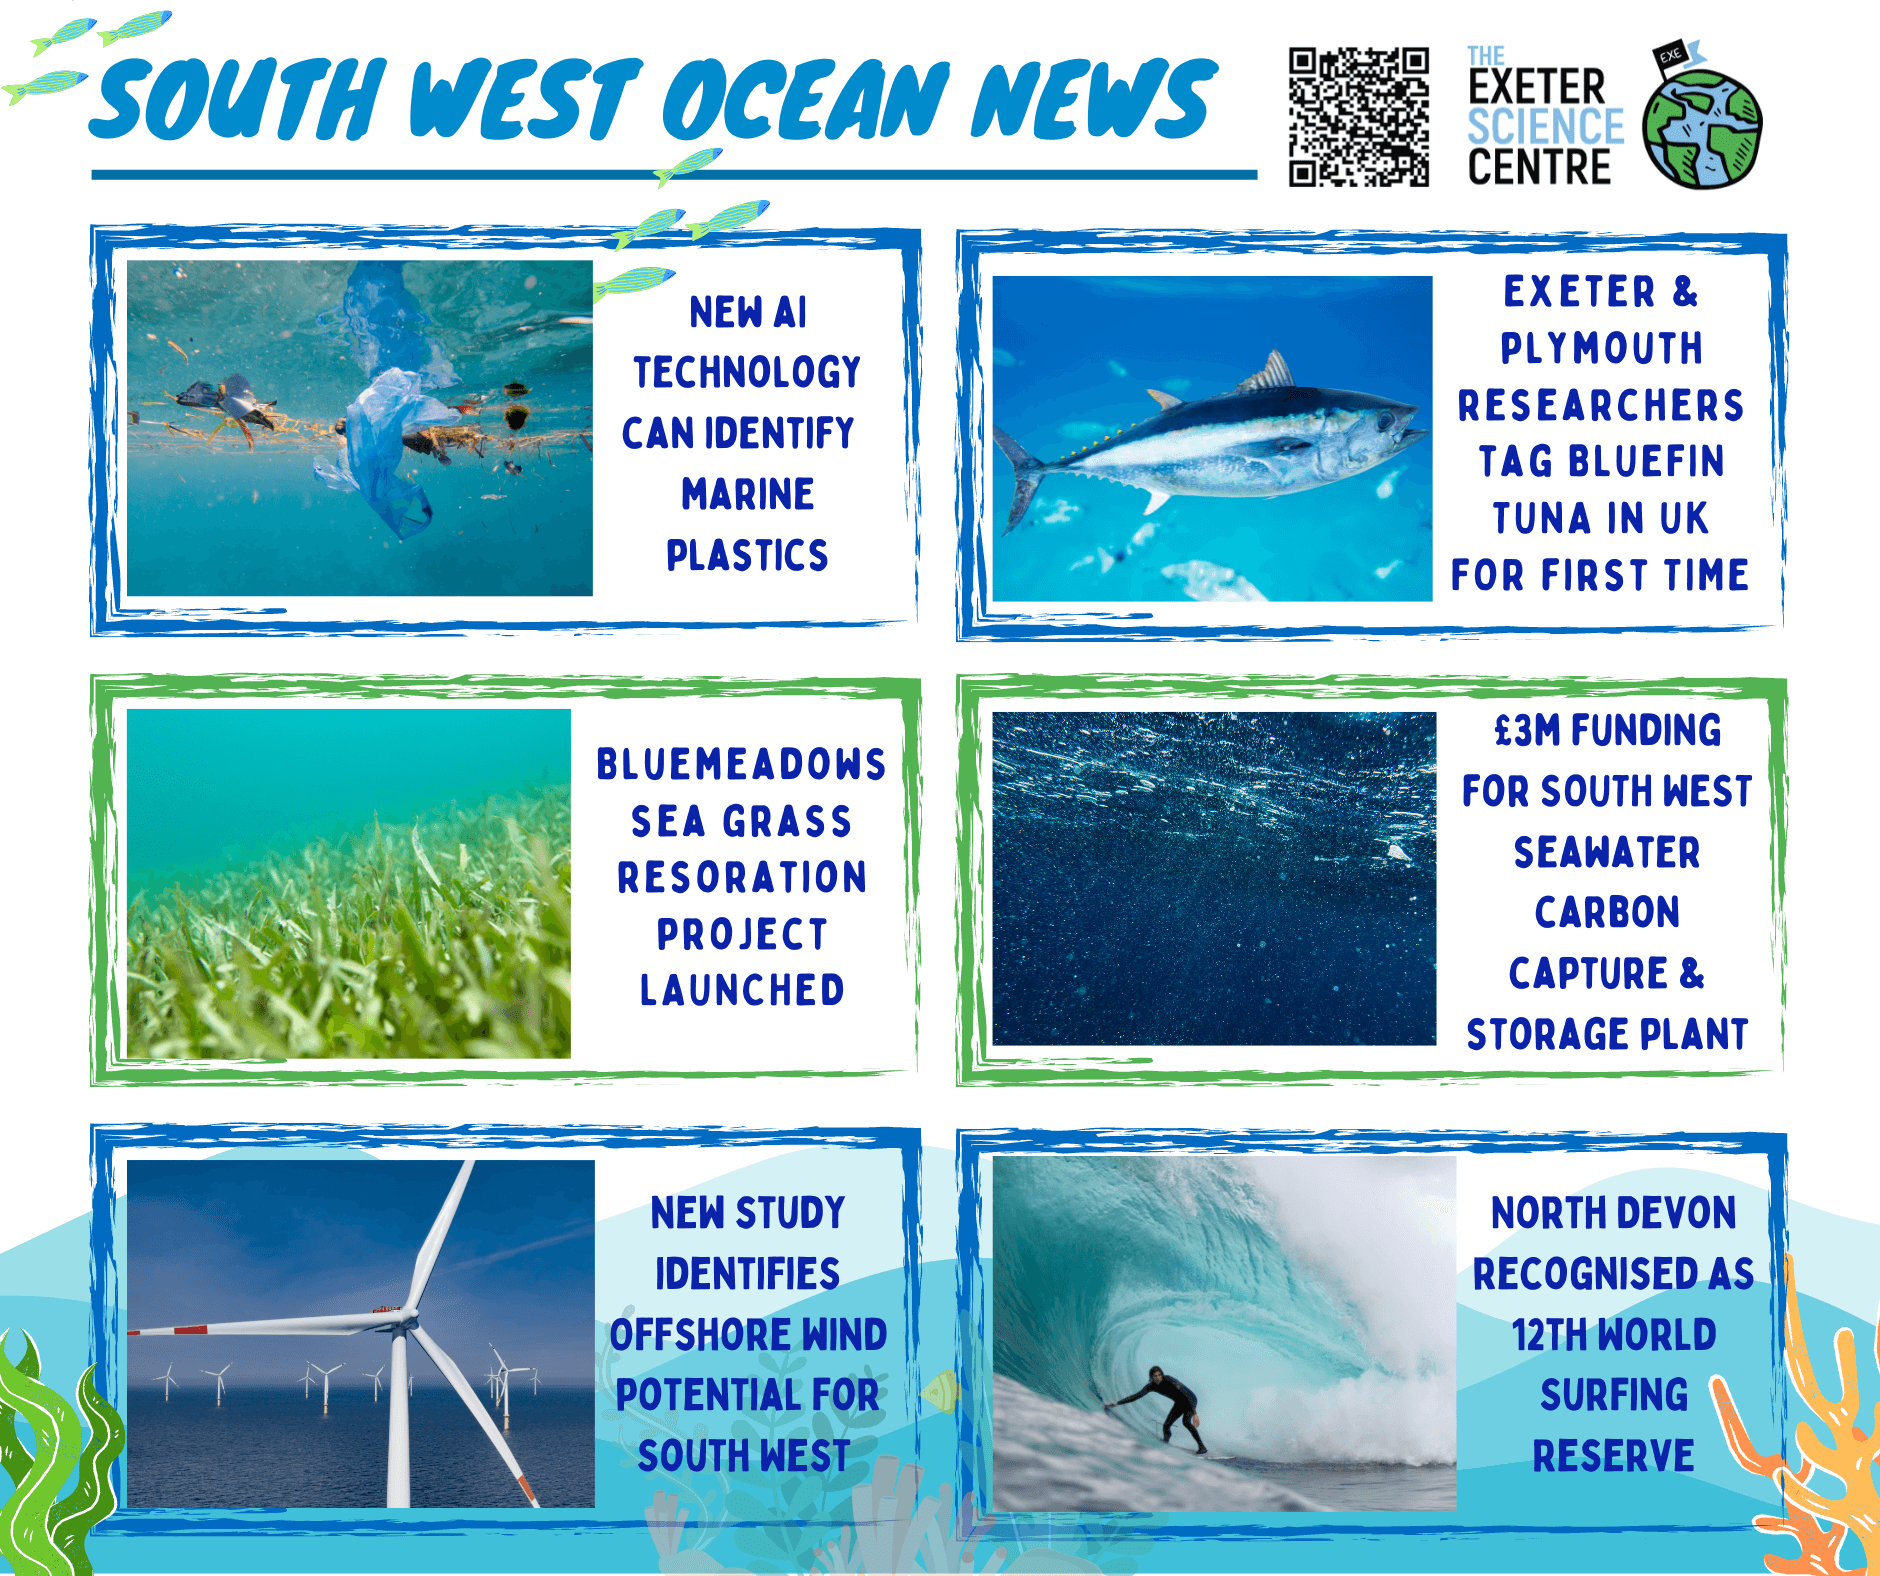 South West Ocean News: 1) New AI technology can identify marine plastics. 2) Exeter & Plymouth researchers tag bluefin tuna in UK for the first time. 3) Bluemeadows sea grass restoration project launched. 4) 3 million pounds funding for south west seawater carbon capture & storage plant. 5) New study identifies offshore wind potential for south west. 6) North Devon recognised as 12th world surfing reserve.
The launch of the Bluemeadows Sea Grass Restoration Project.
A £3M funding announcement for a South West seawater carbon capture and storage plant.
A new study that identifies the potential for offshore wind energy in the South West.
Recognition of North Devon as the 12th World Surfing Reserve.